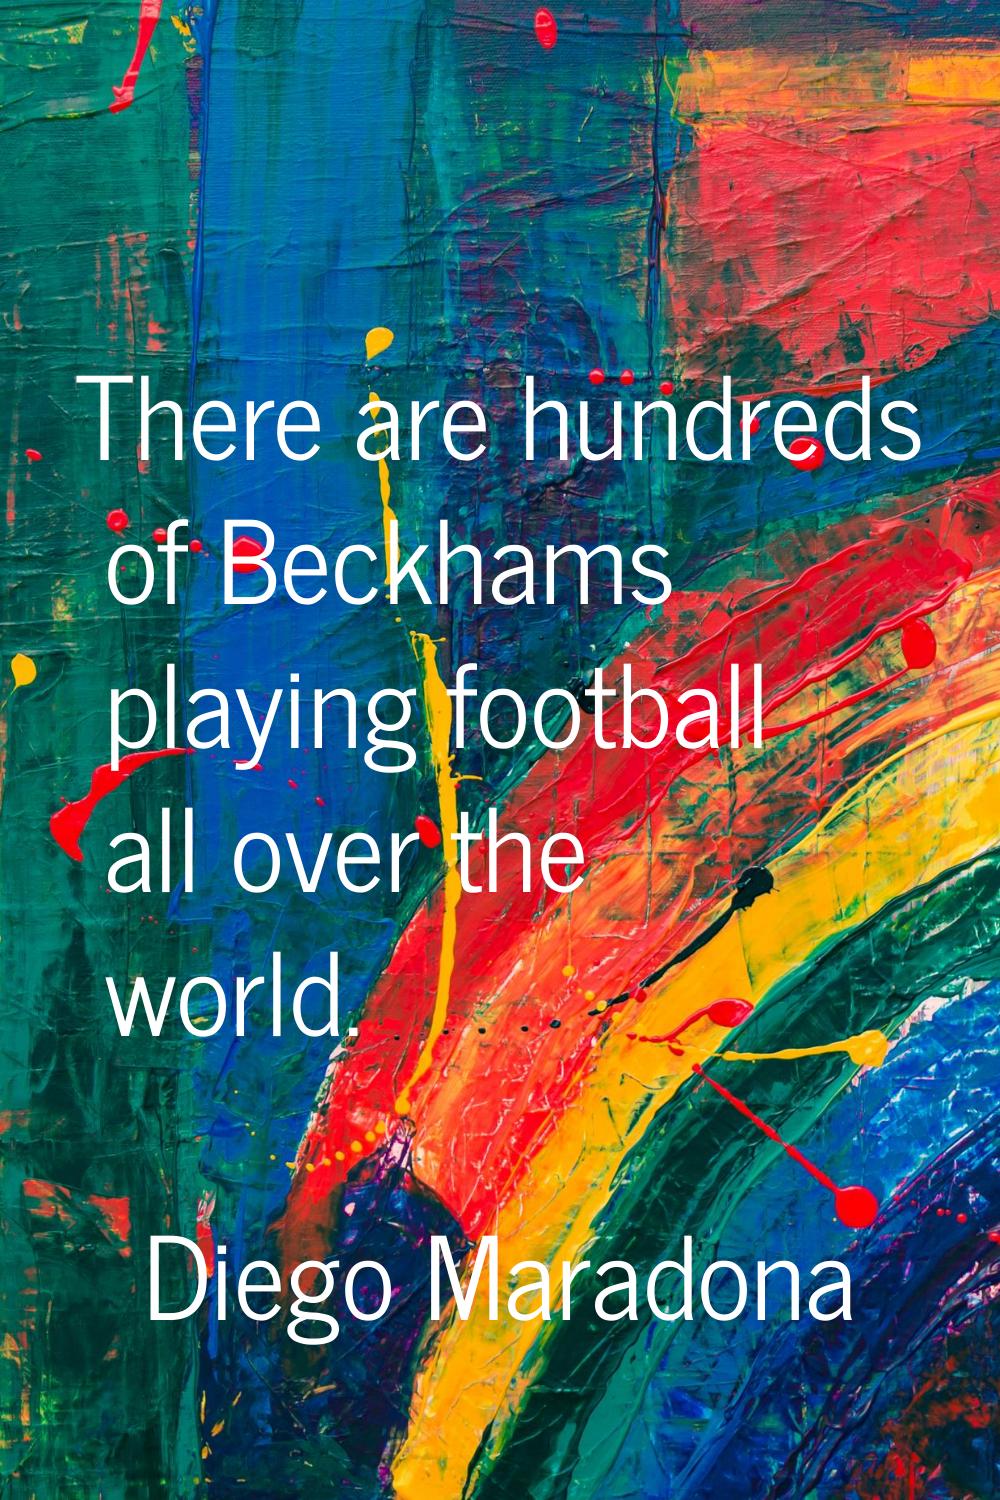 There are hundreds of Beckhams playing football all over the world.